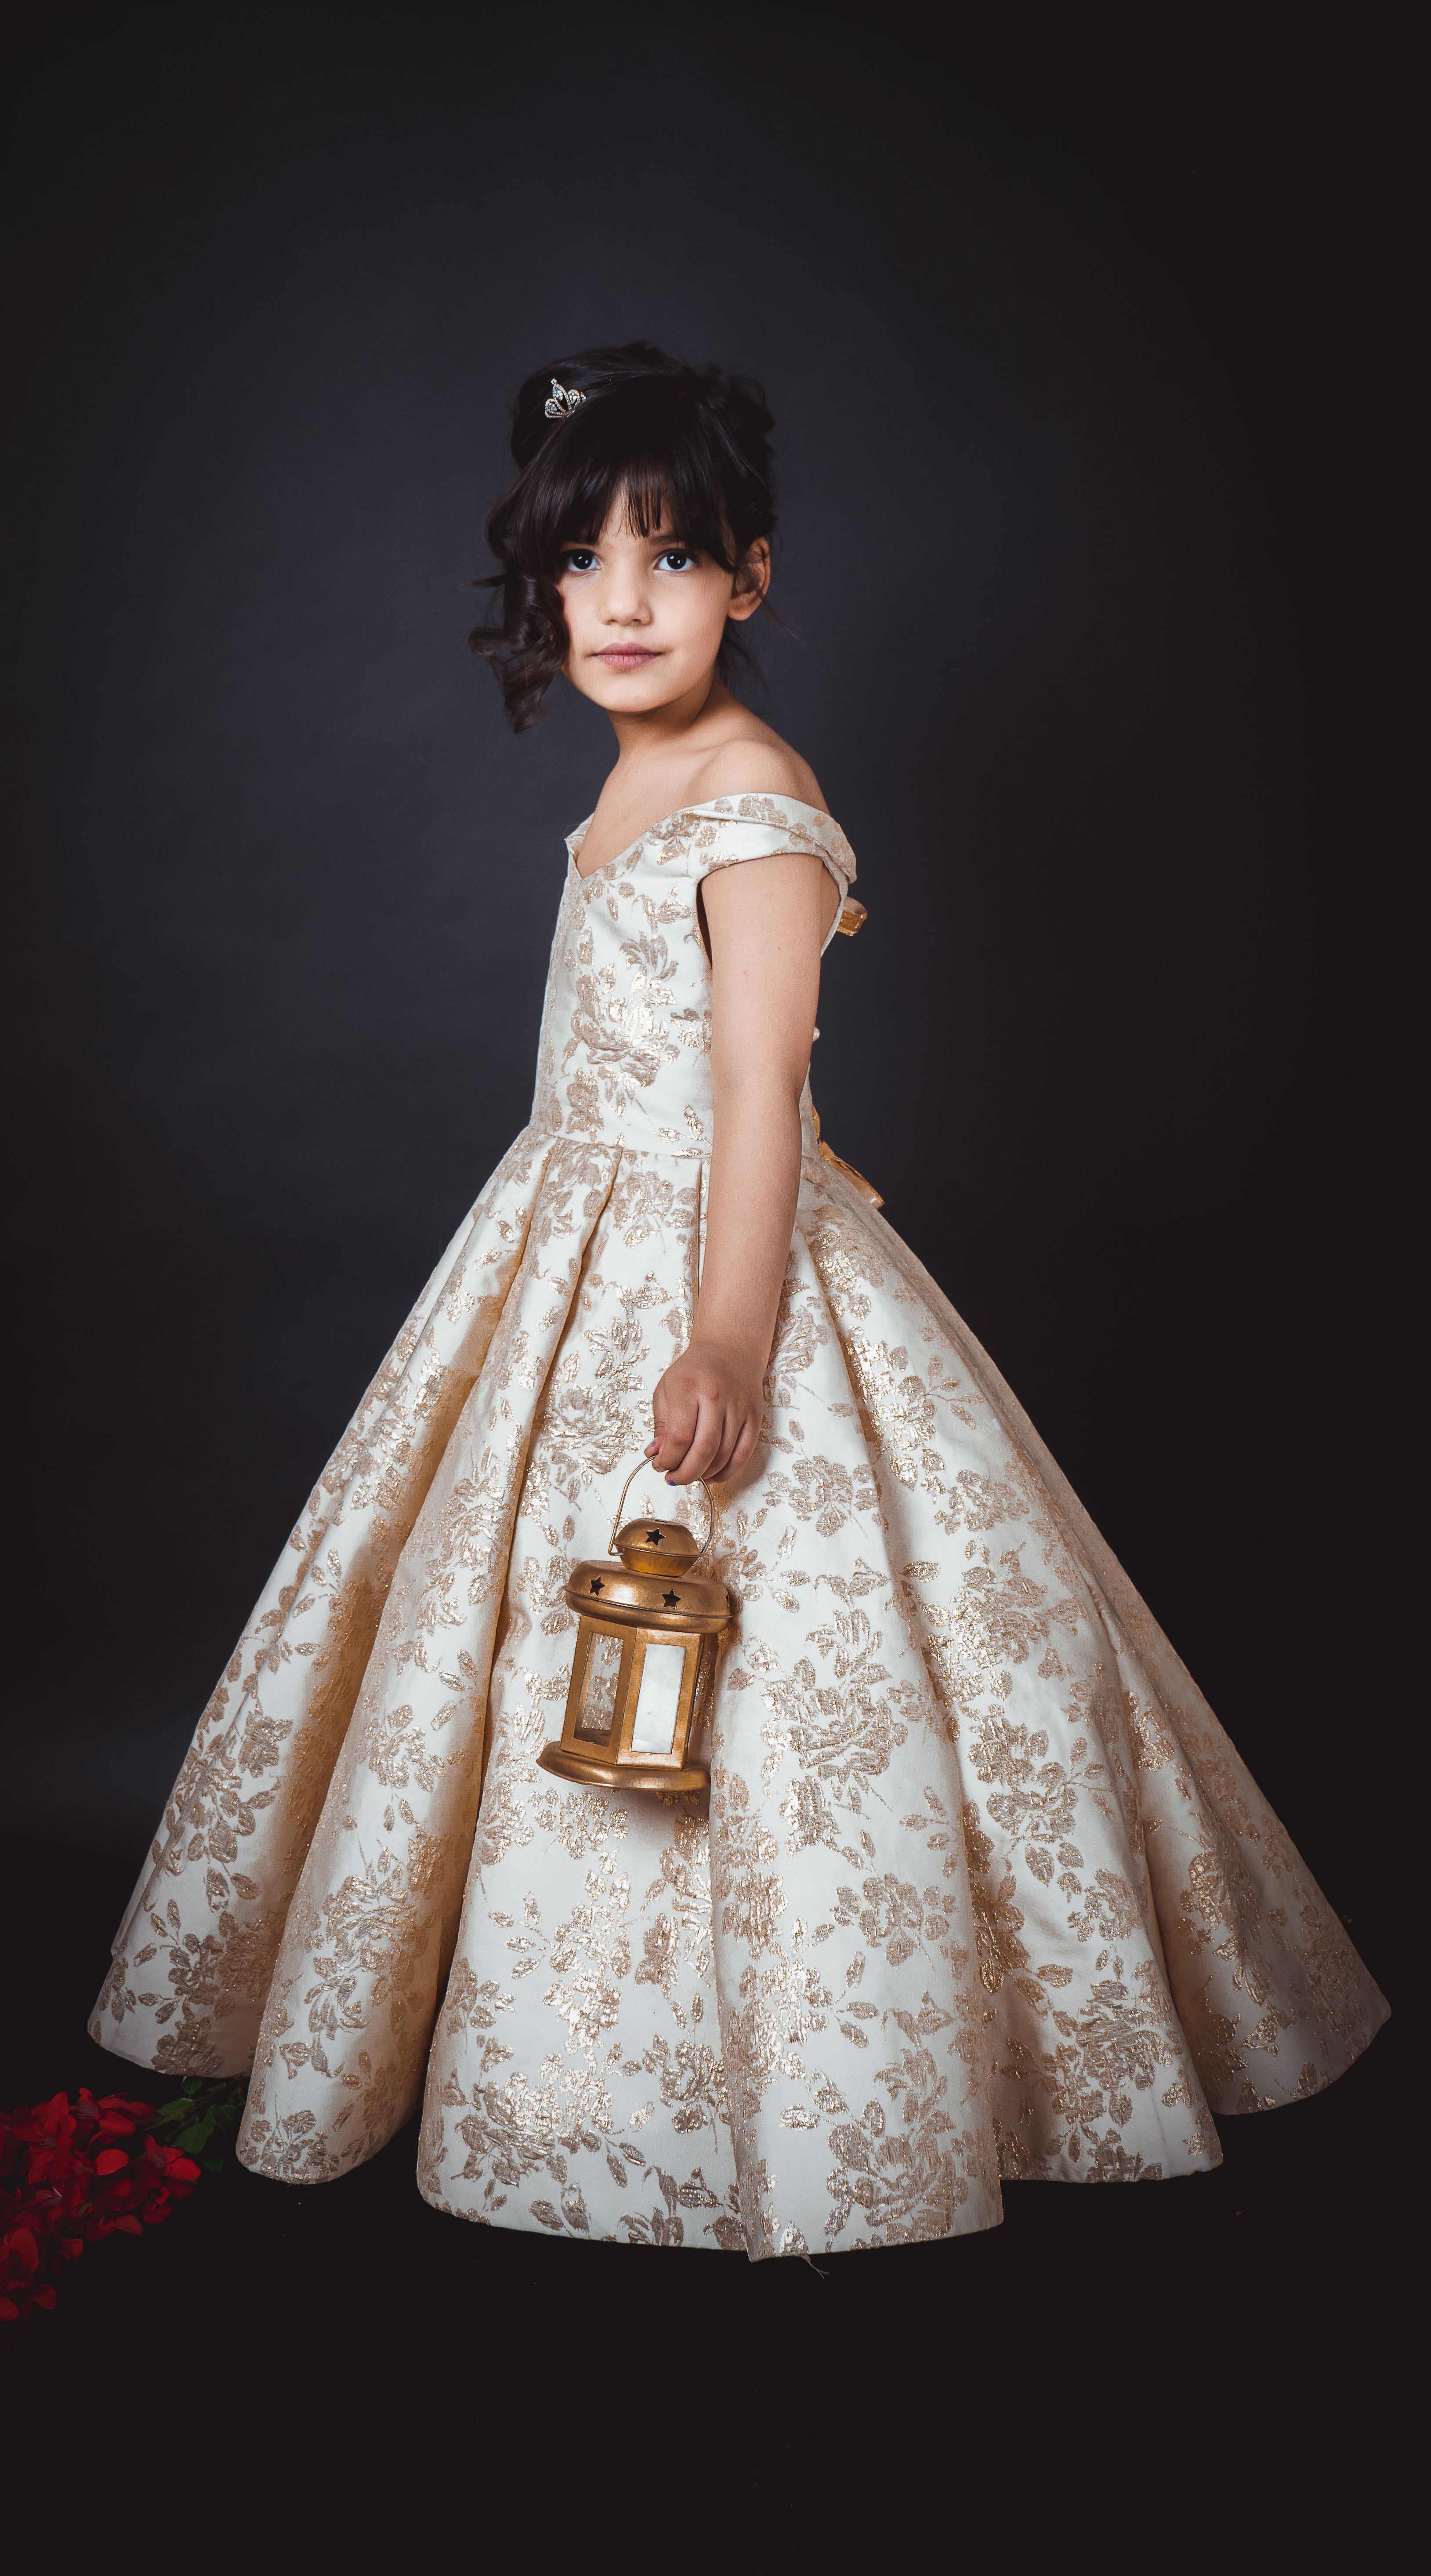 Princess gowns for girls